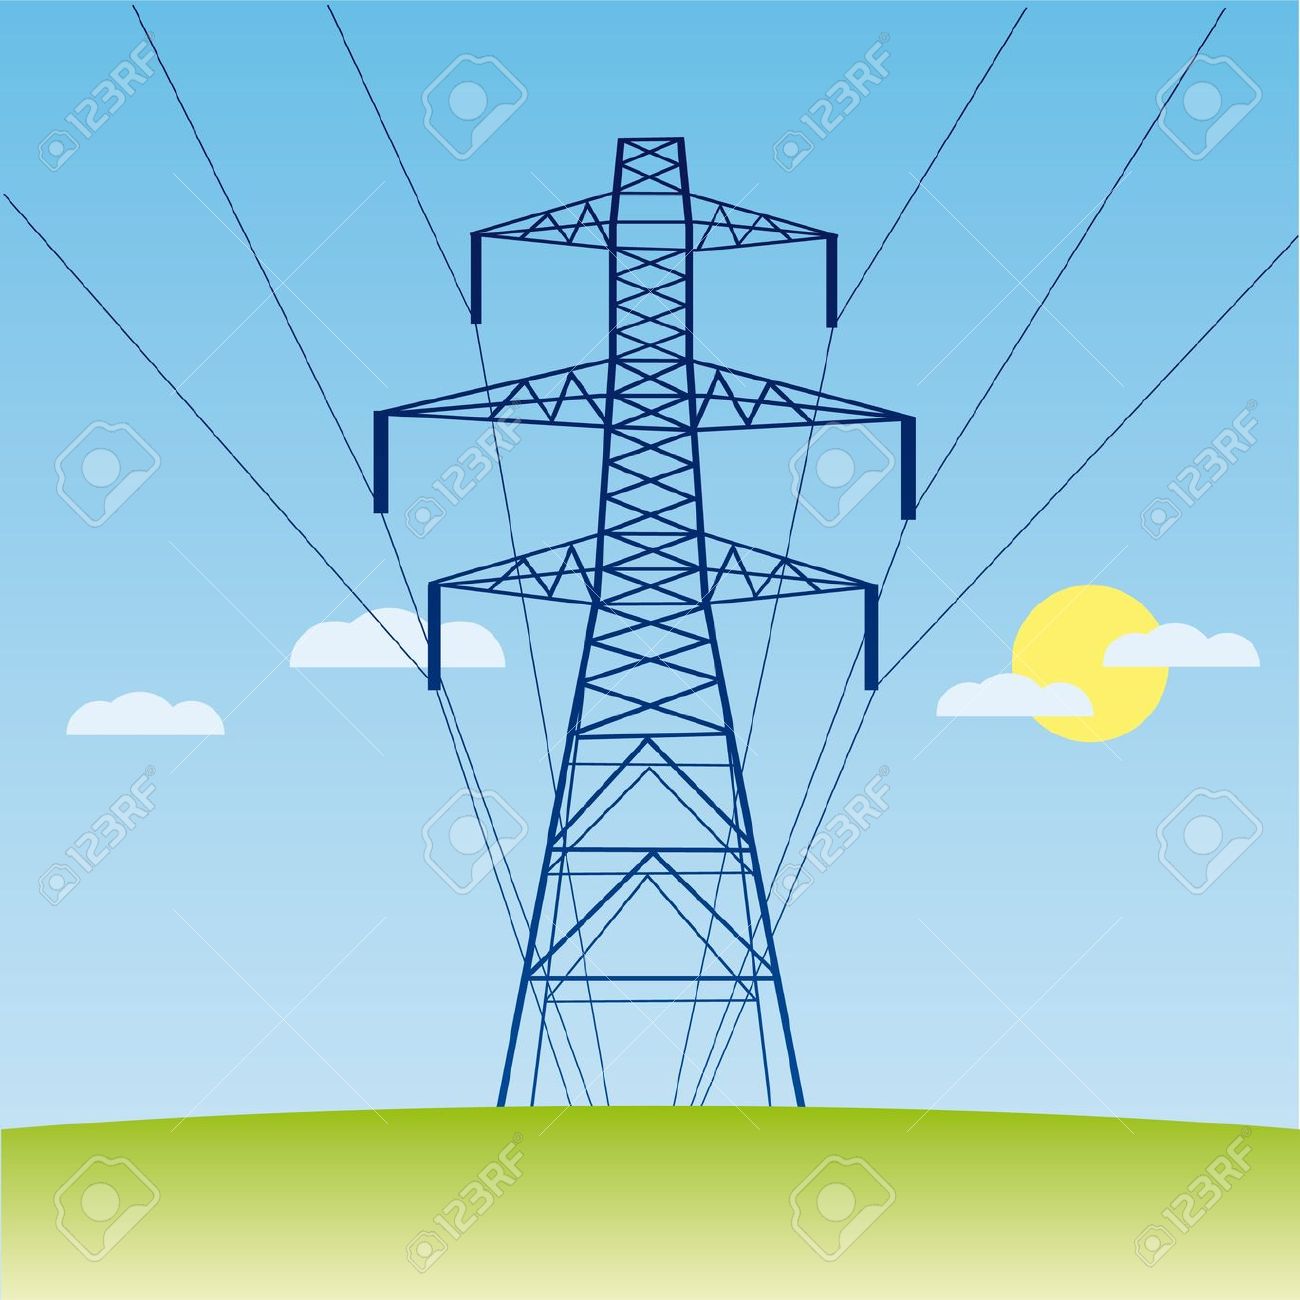 clipart power lines - photo #39